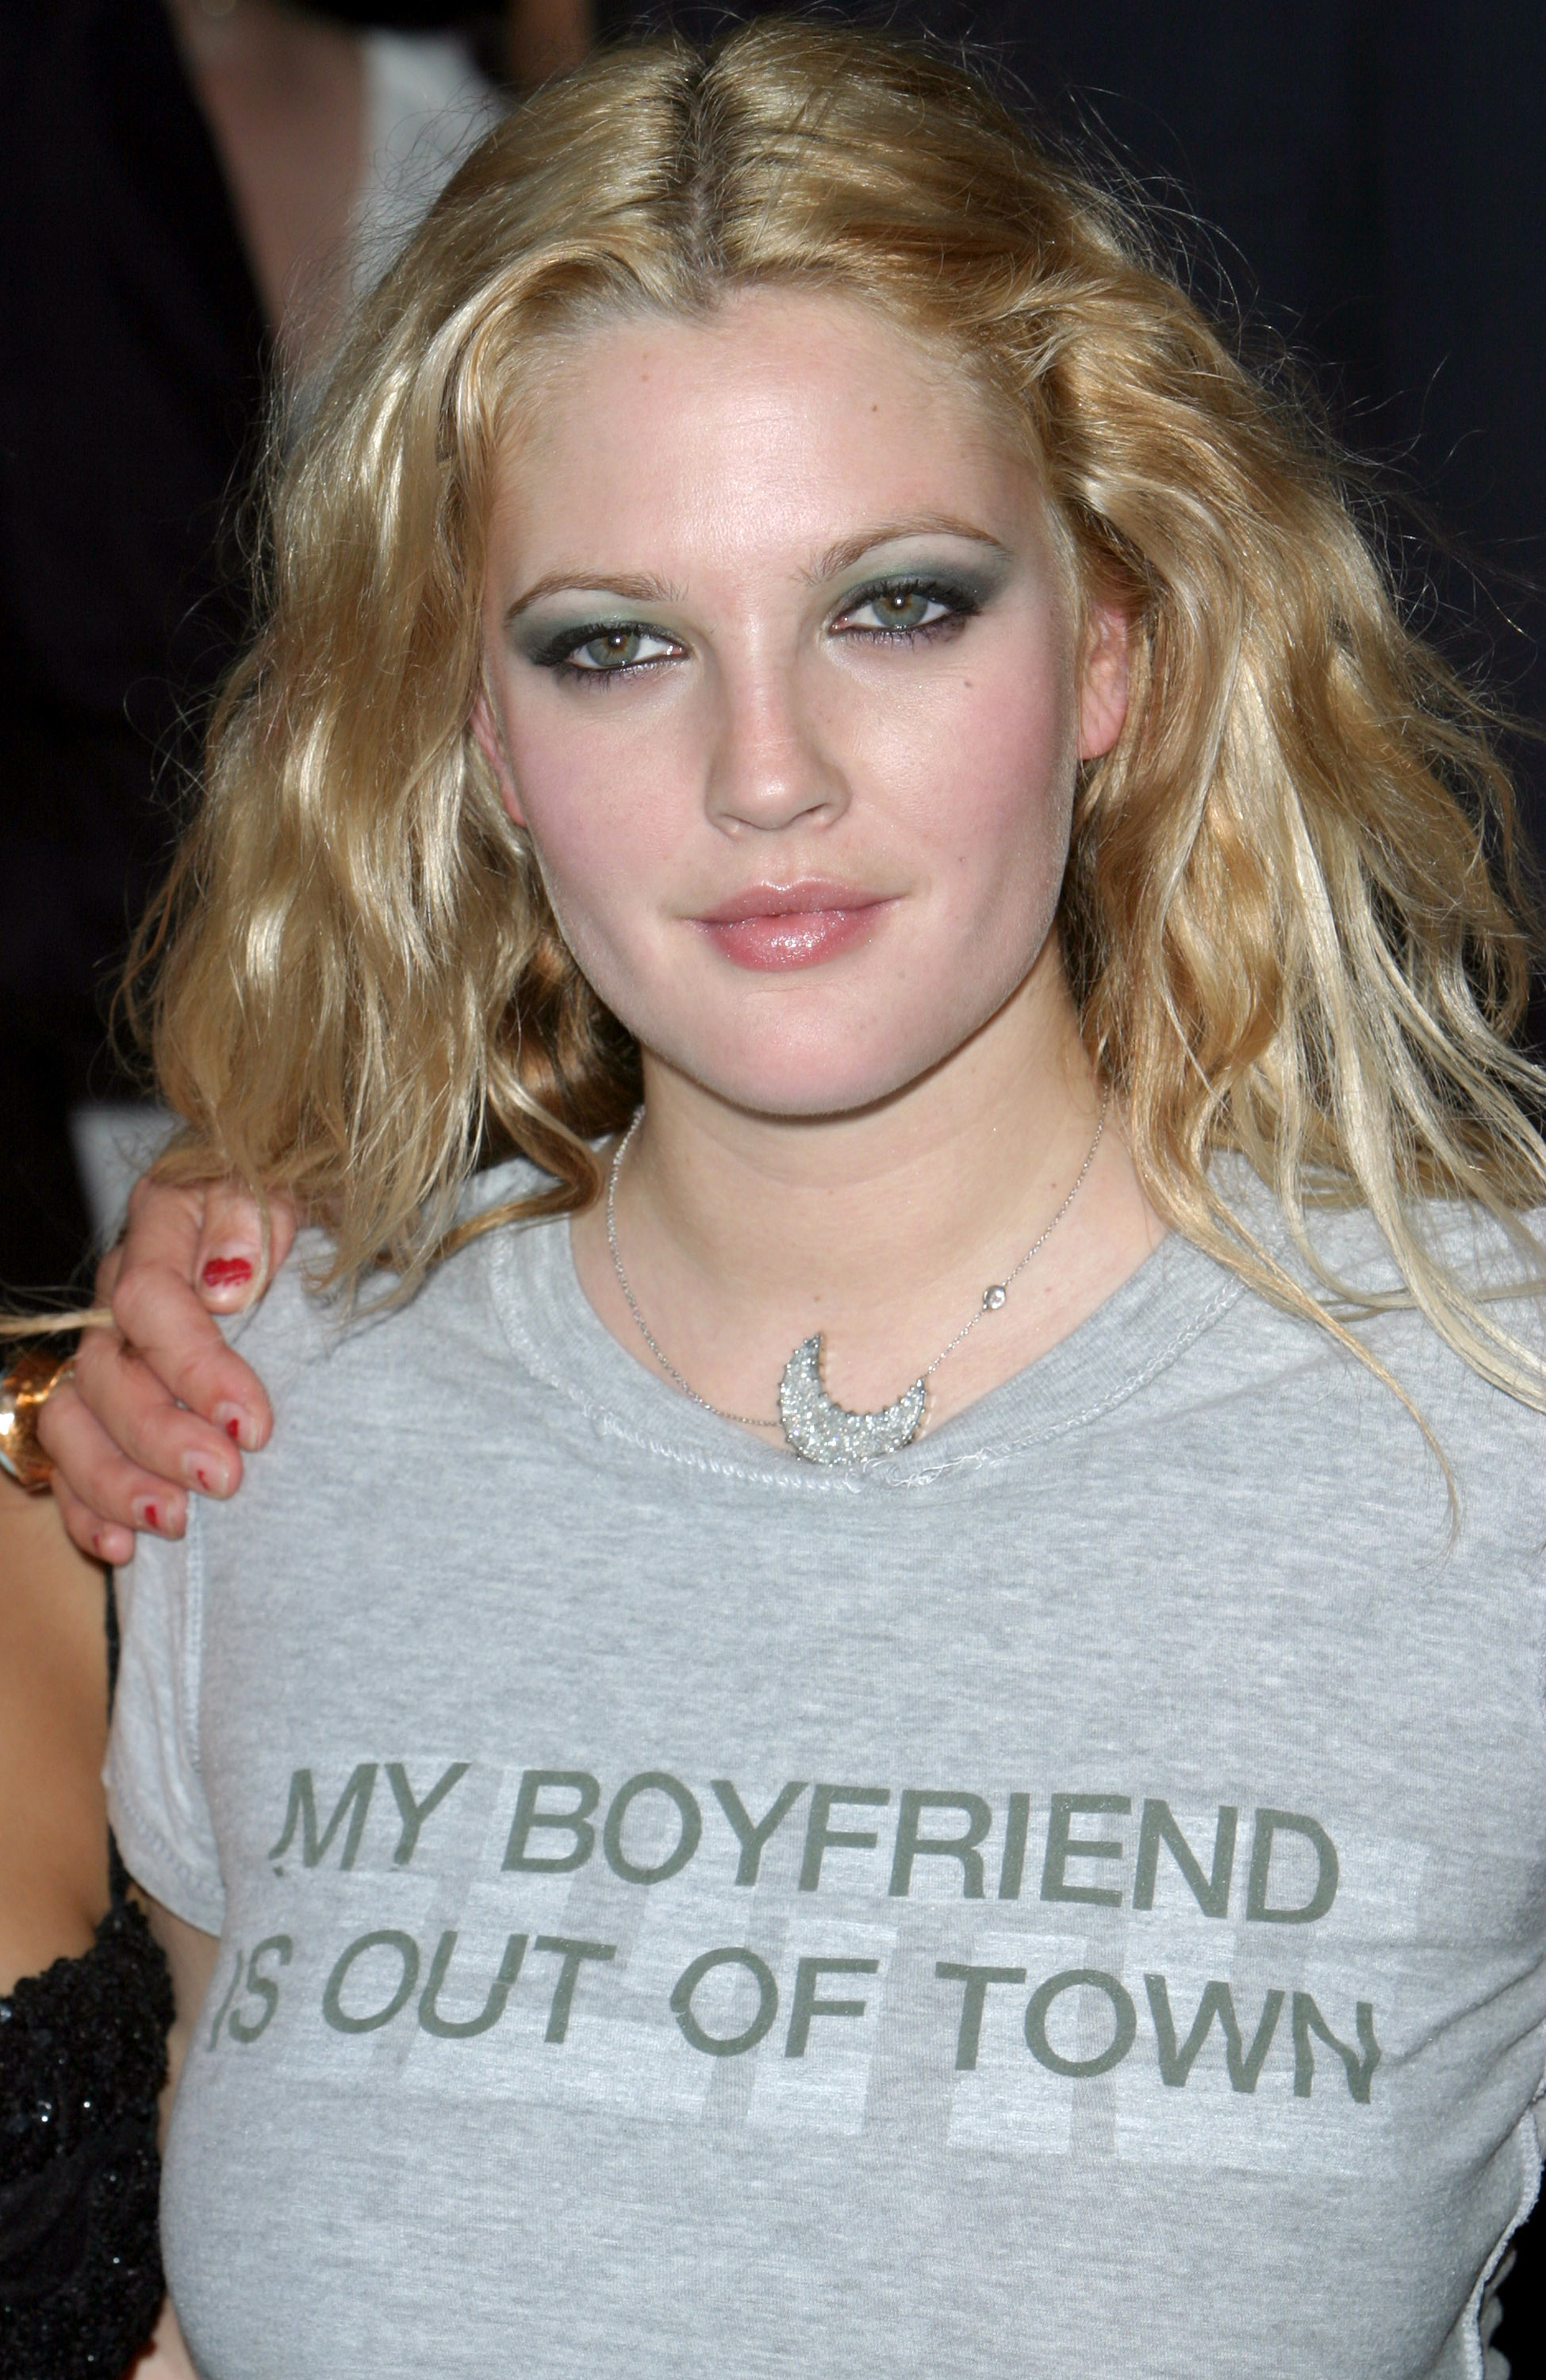 Drew Barrymore poses with a slight smile, wearing a shirt that reads “MY BOYFRIEND IS OUT OF TOWN.”